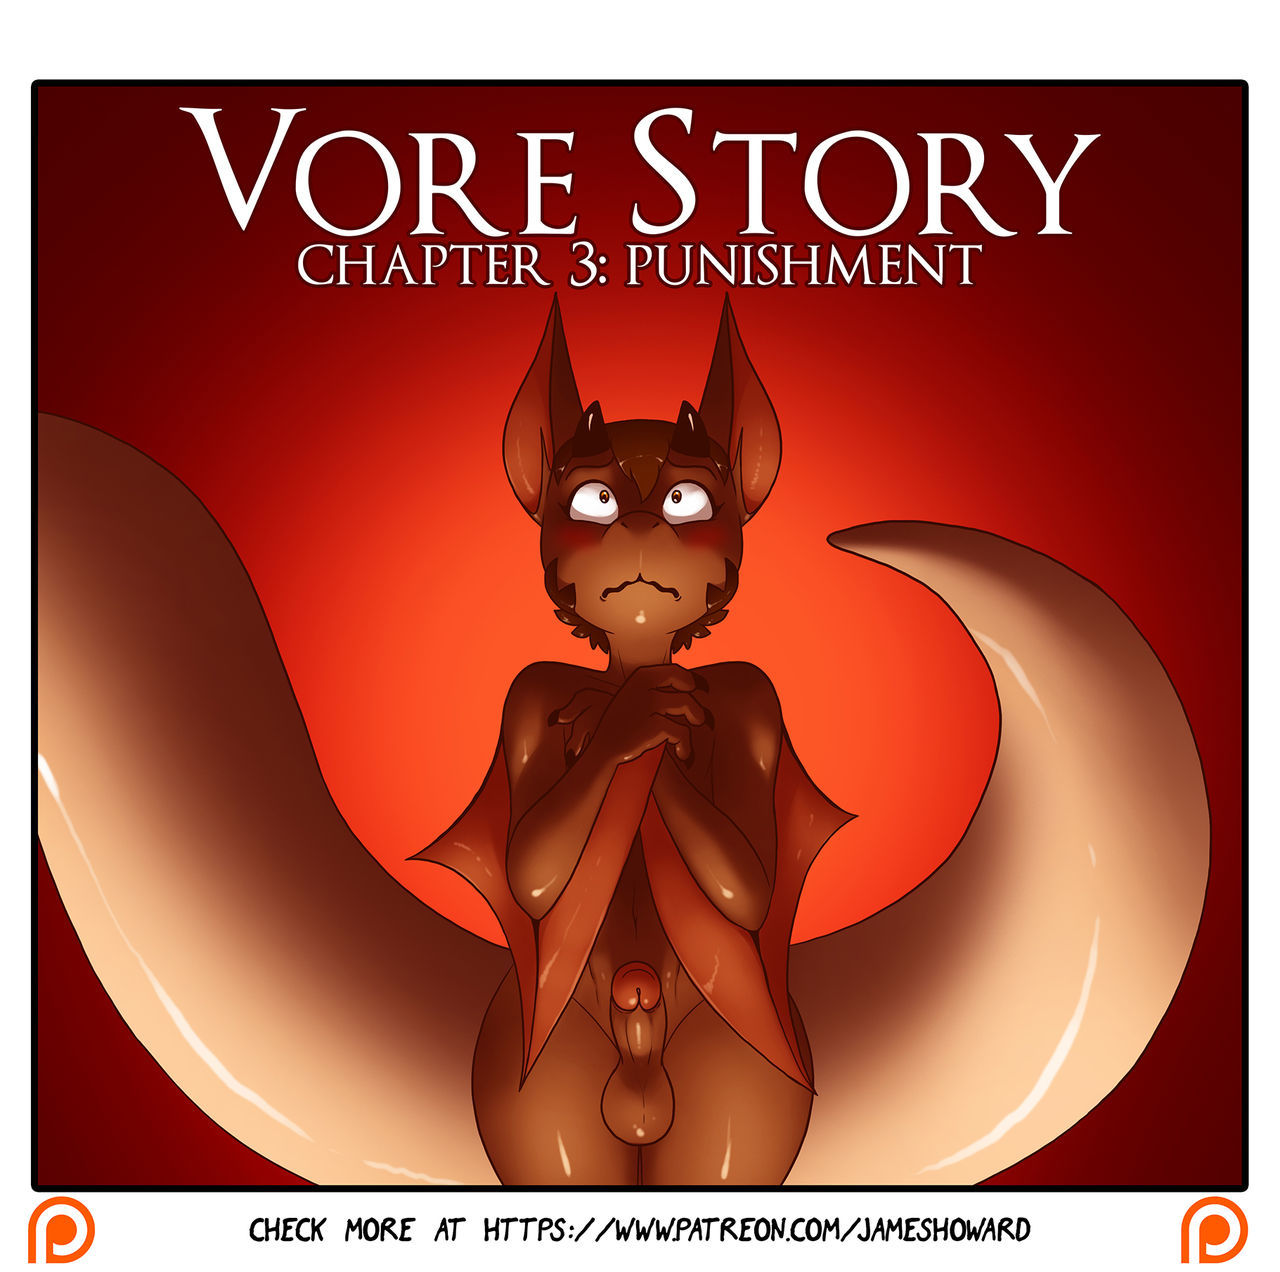 Vore Story Ch. 3 - Punishment - James Howard page 1